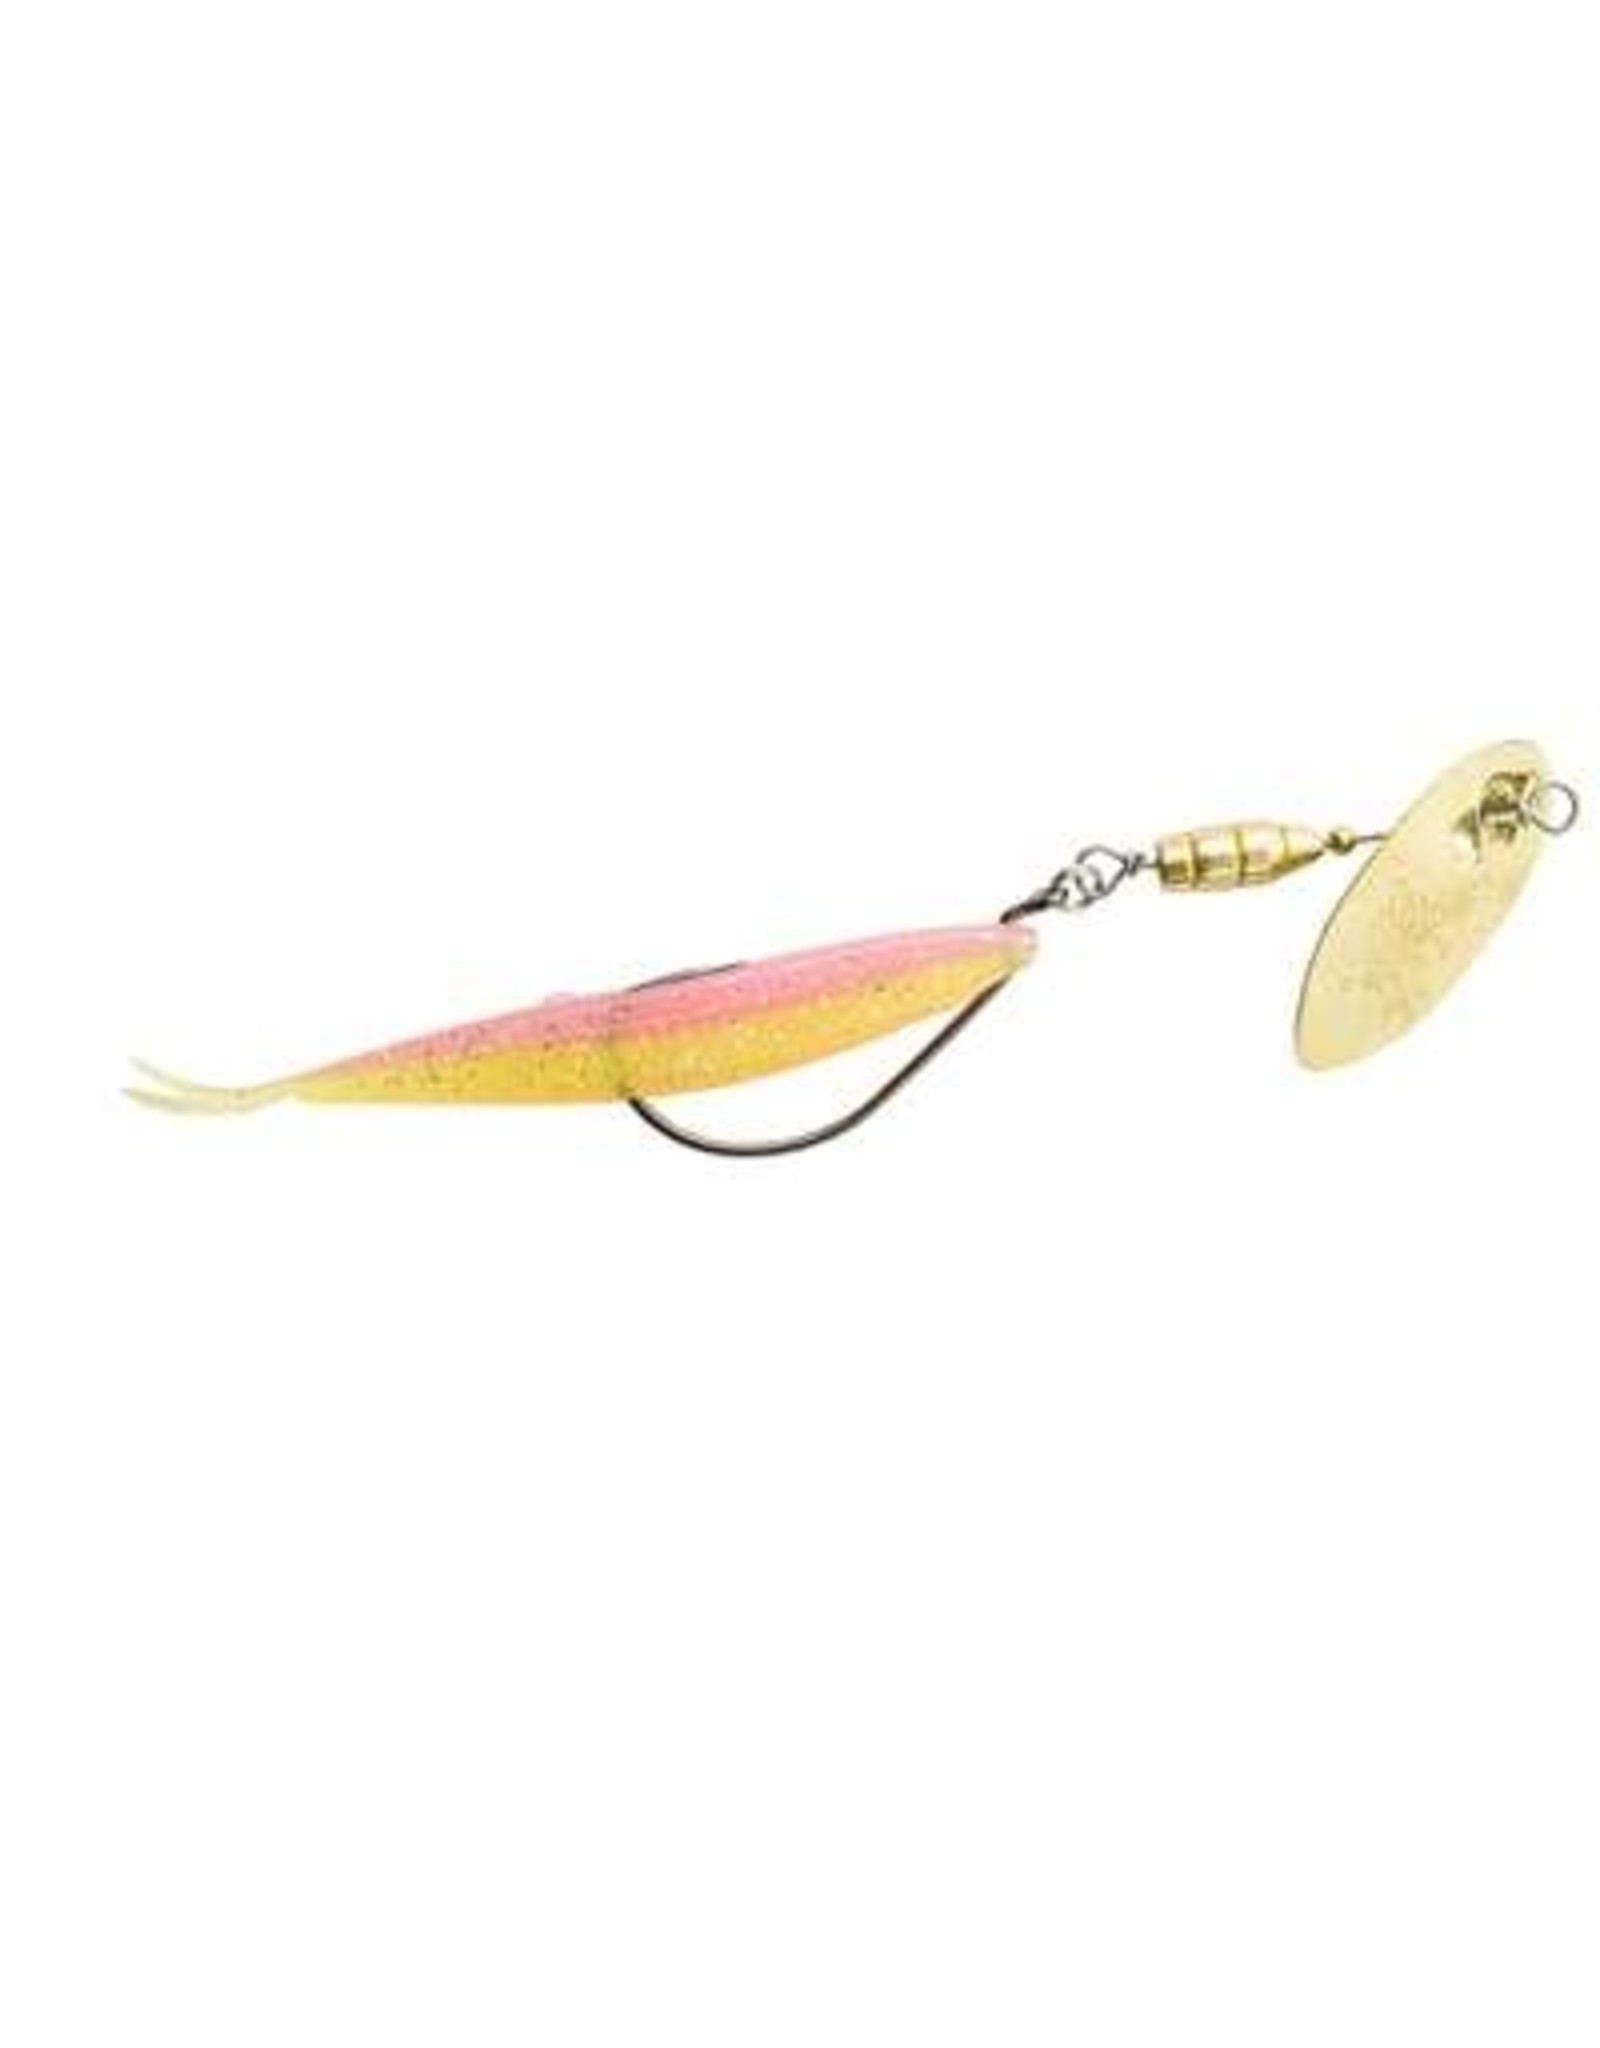 Panther Martin Weed Runner - Gold Blade w/ Pink - 2 Count